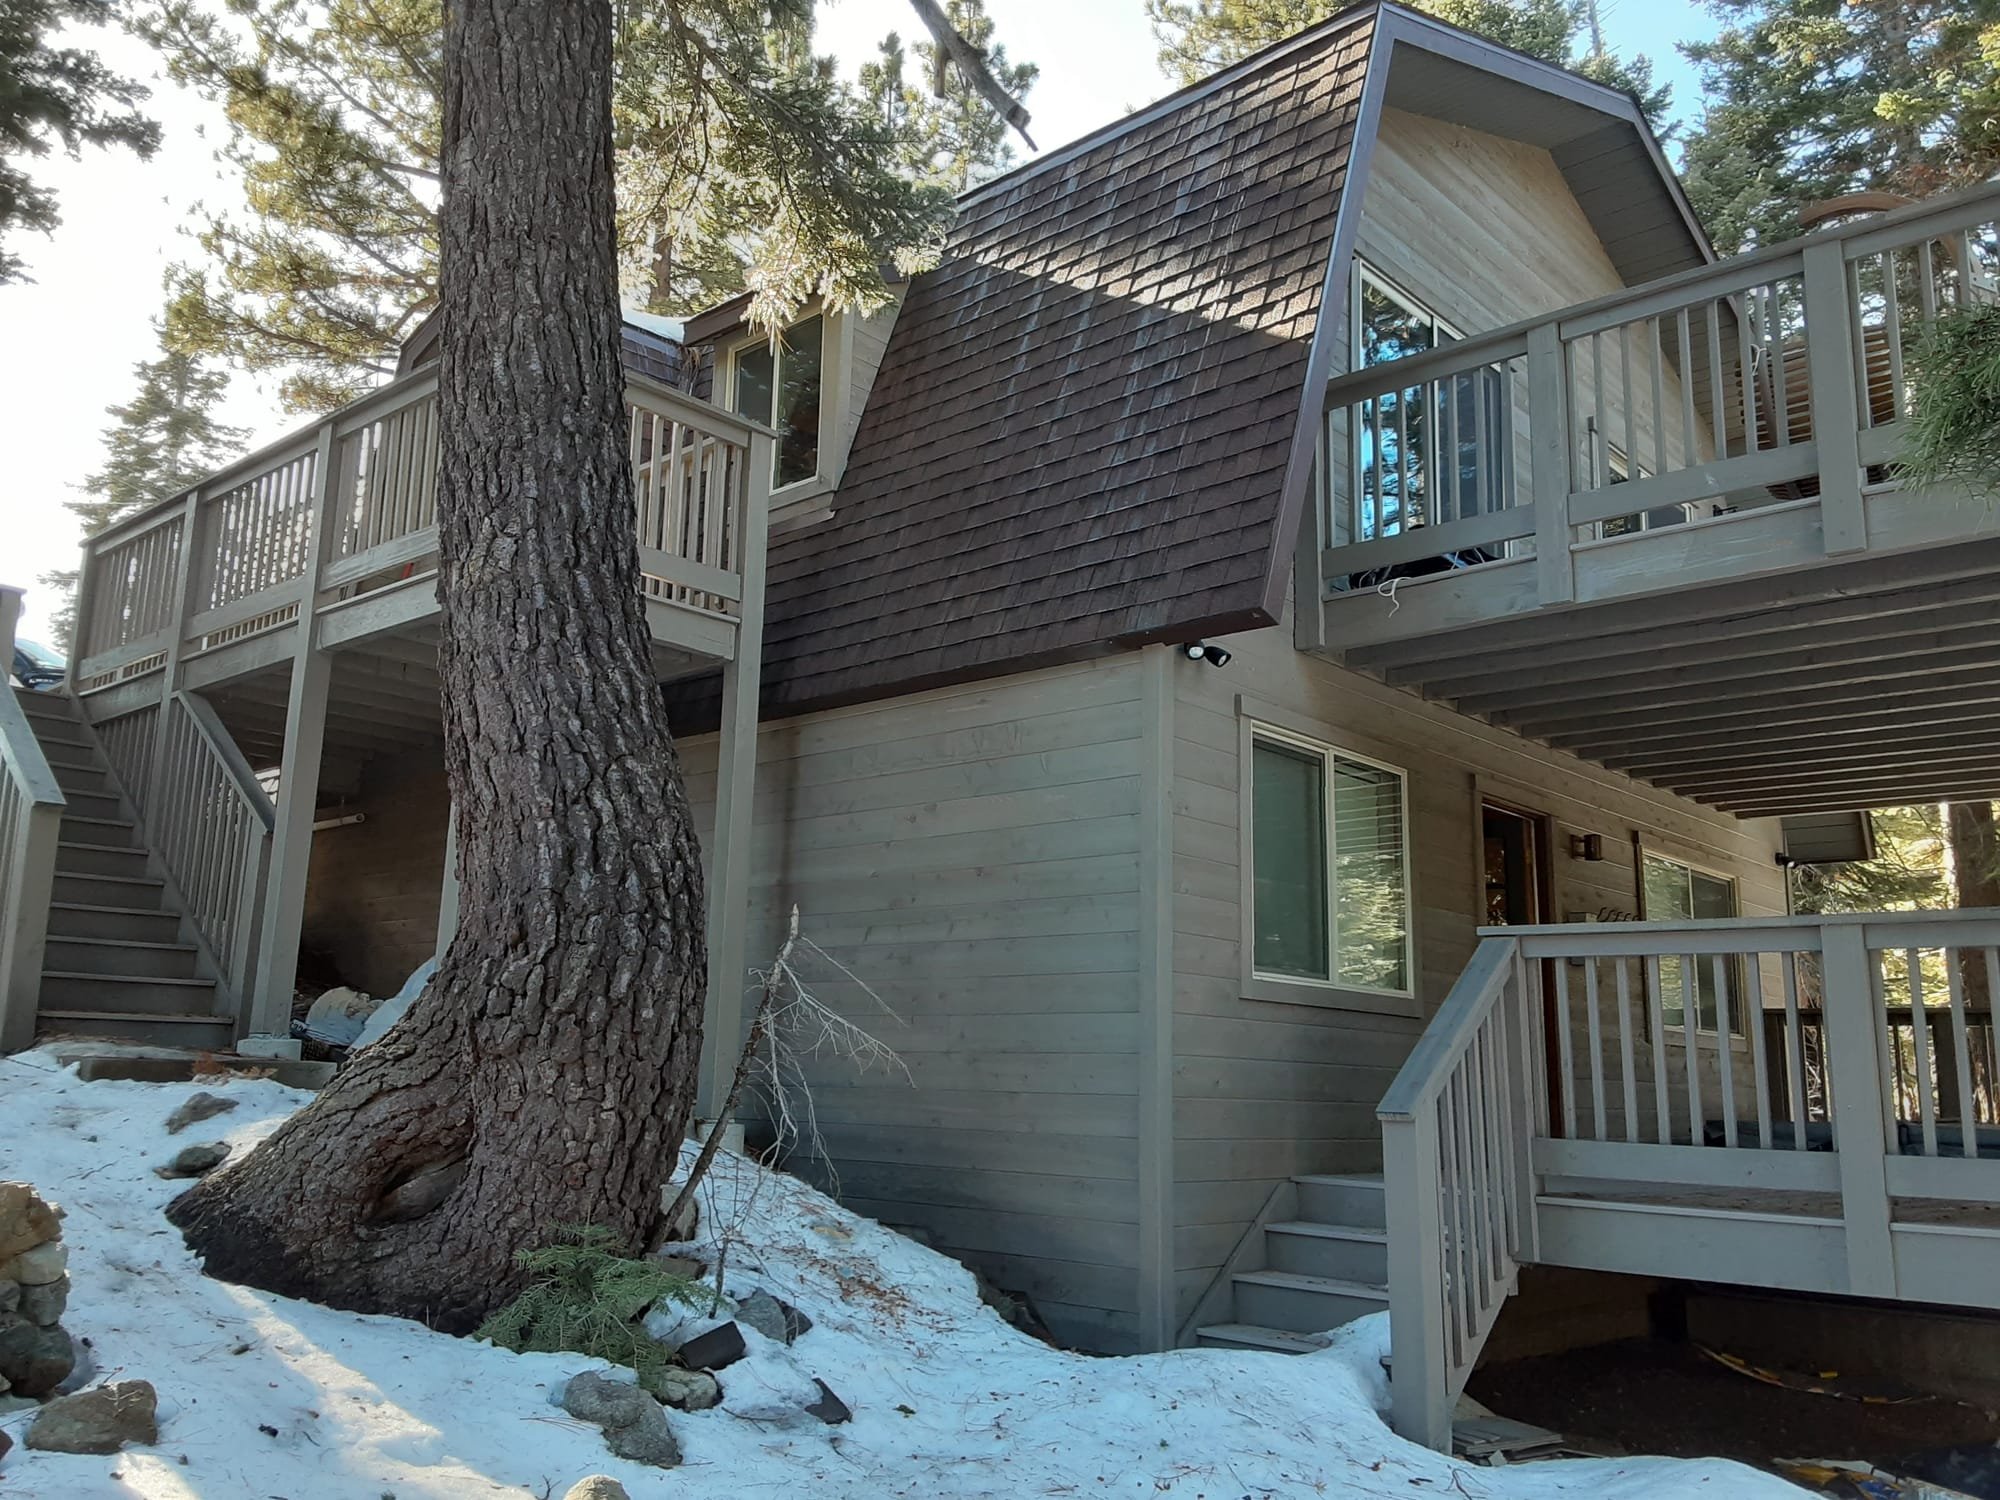 "PENDING" 316 Heather Circle, South Lake Tahoe, Ca. Listed $699,950